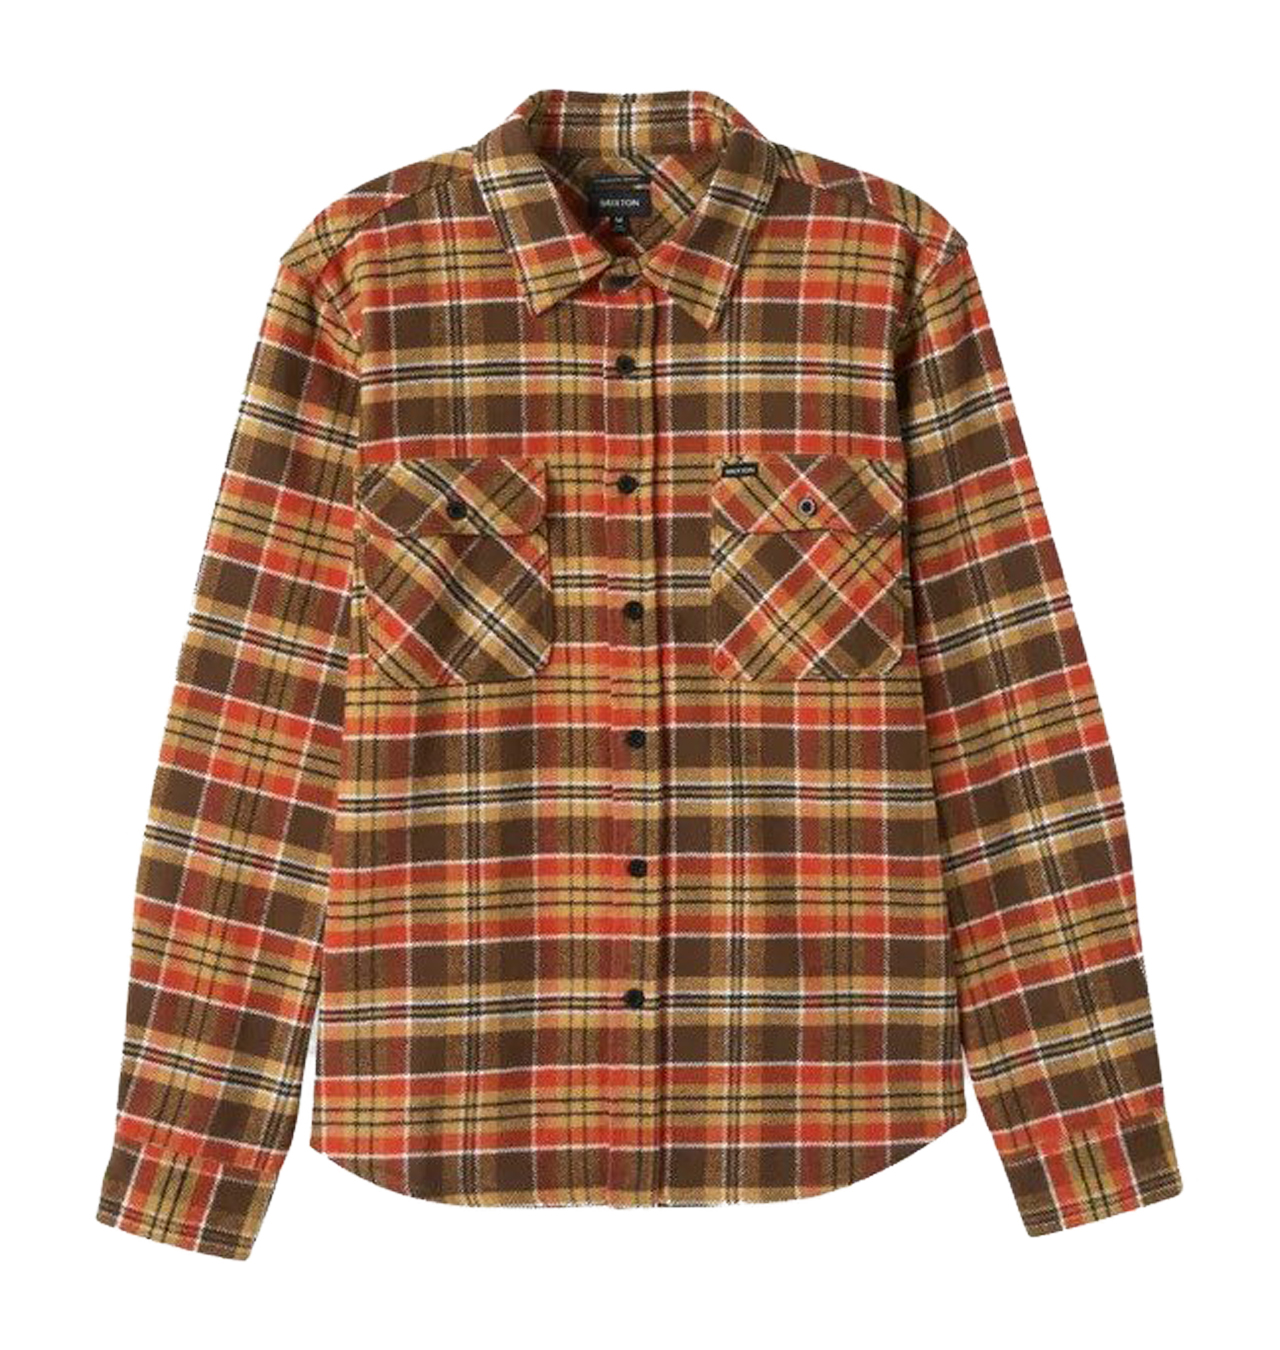 Brixton - Bowery Heavy Weight Flannel - Desert Palm/Antelope/Burnt Red